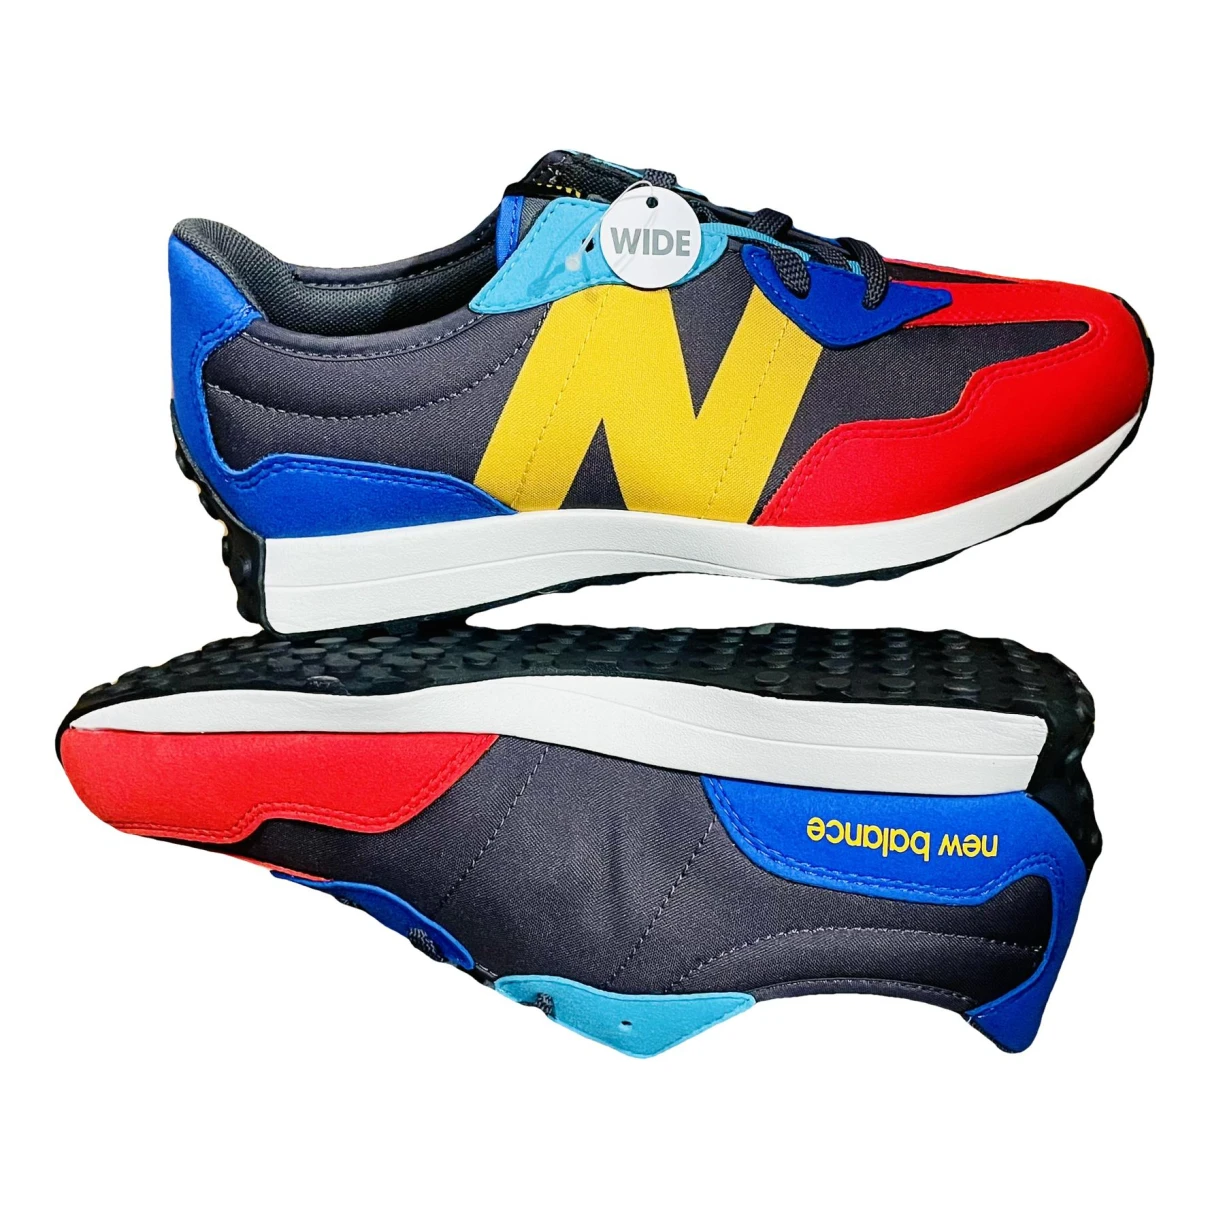 Pre-owned New Balance 327 Cloth Trainers In Multicolour